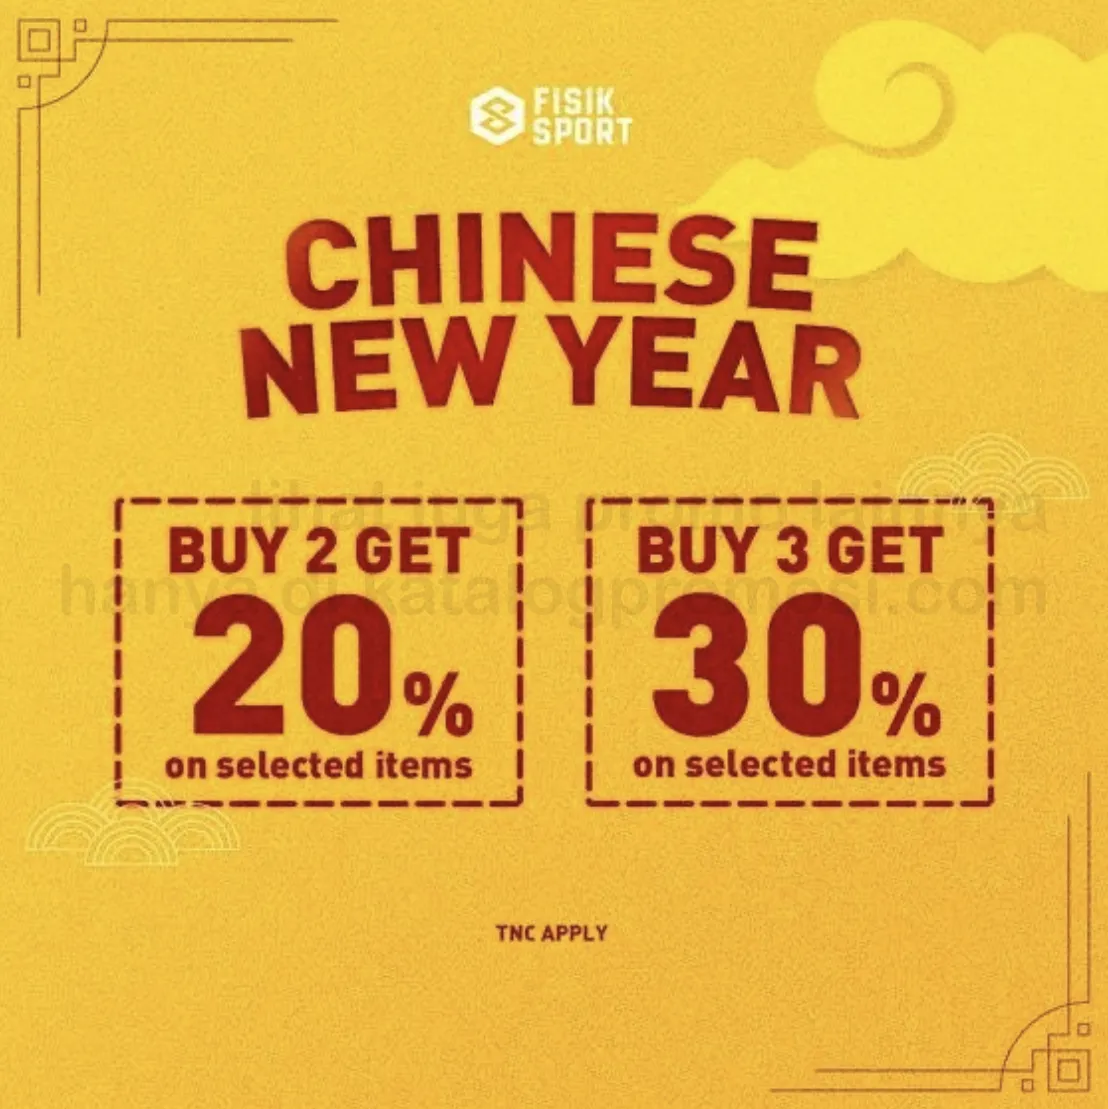 Promo FISIK SPORTS CHINESE NEW YEAR DEALS - BUY 2 GET 20% | BUY 3 GET 30% 